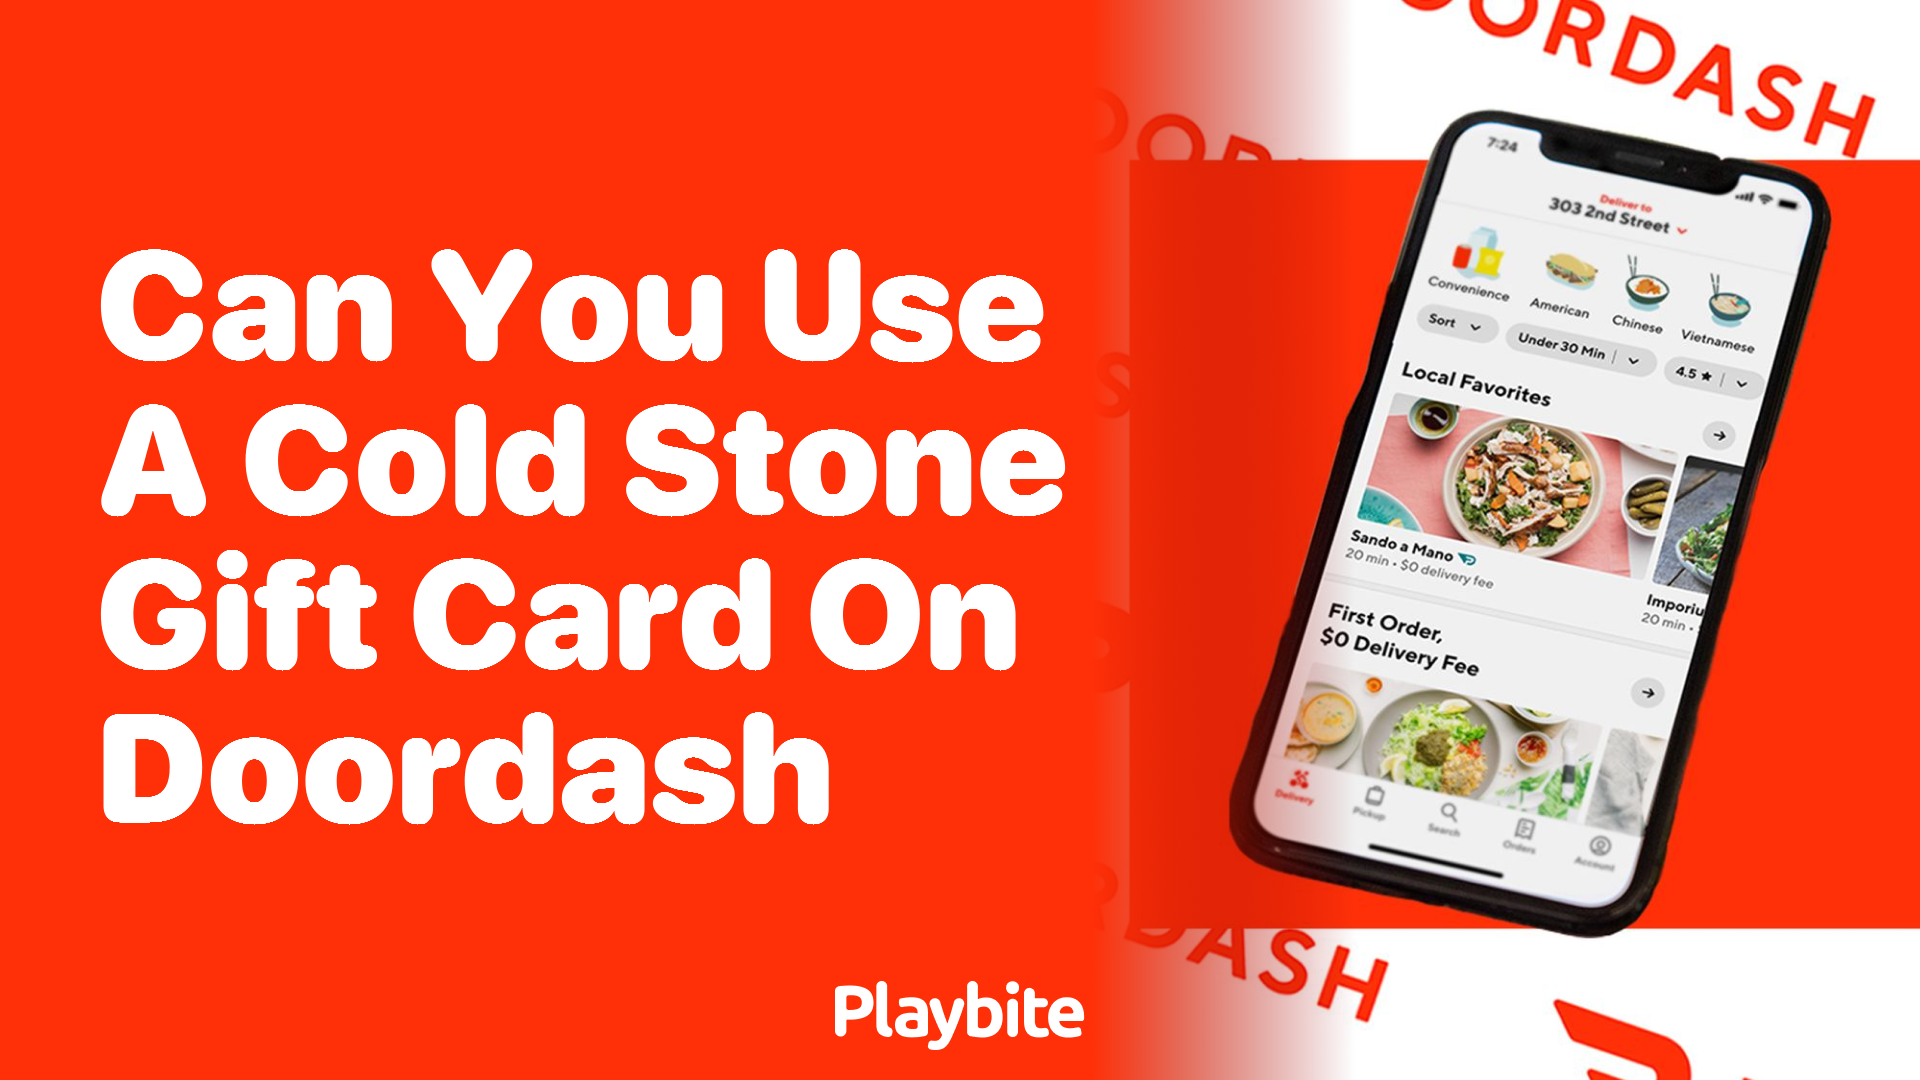 Can You Use a Cold Stone Gift Card on DoorDash?